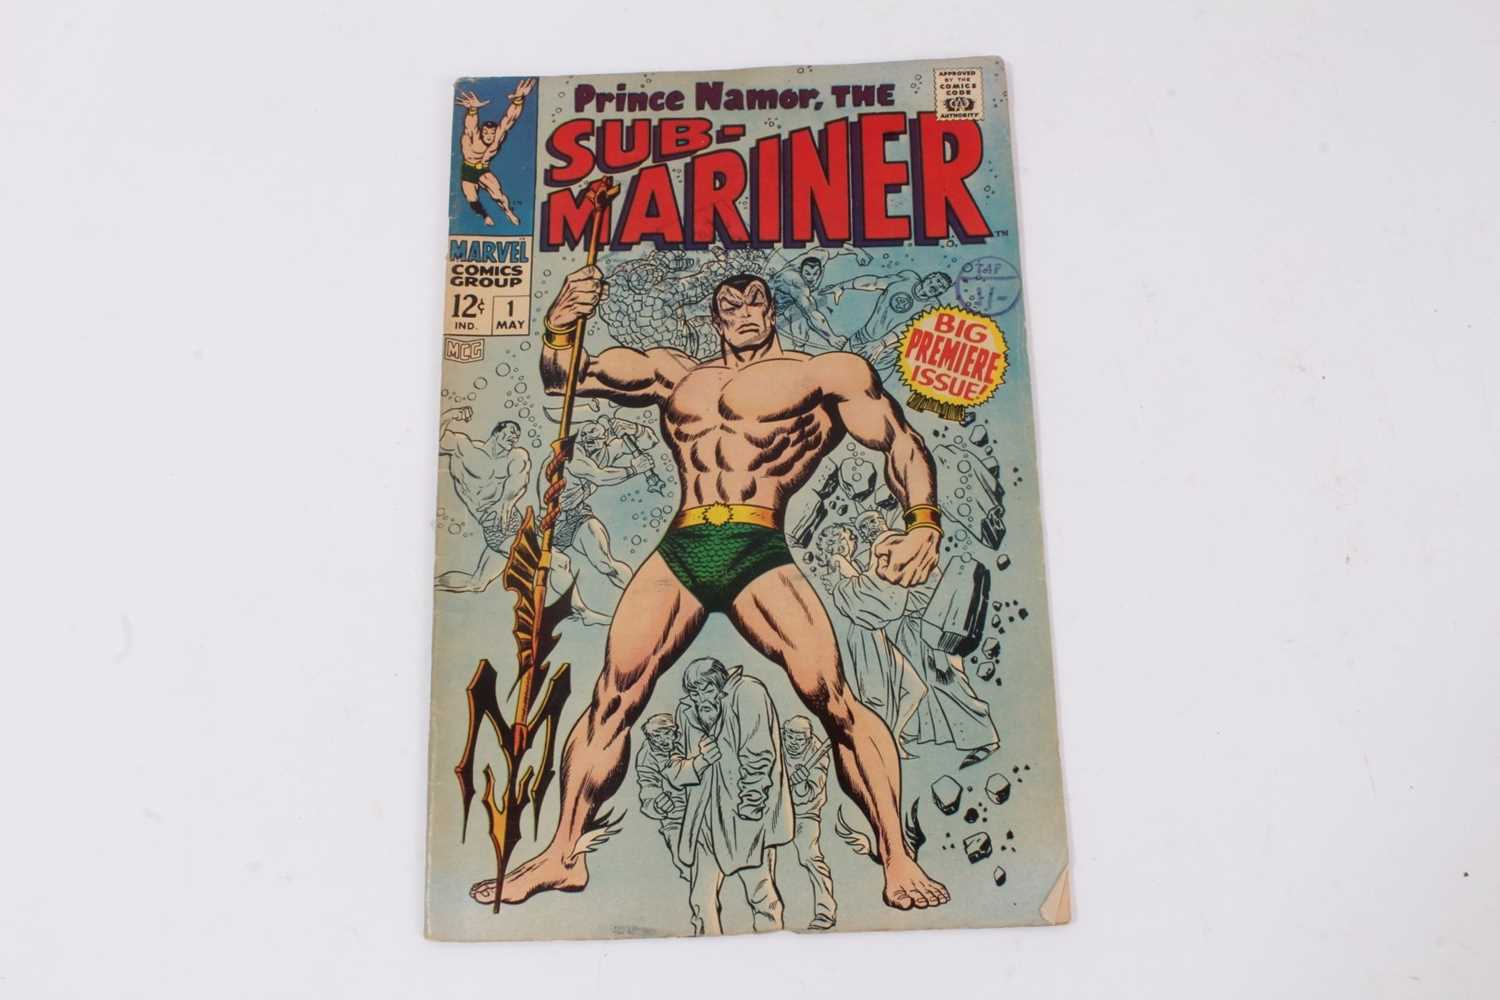 Lot 9 - Marvel Comics Prince Namor, The Sub Mariner #1 (1968). First solo appearance and origin story, priced 12 cents. (1)